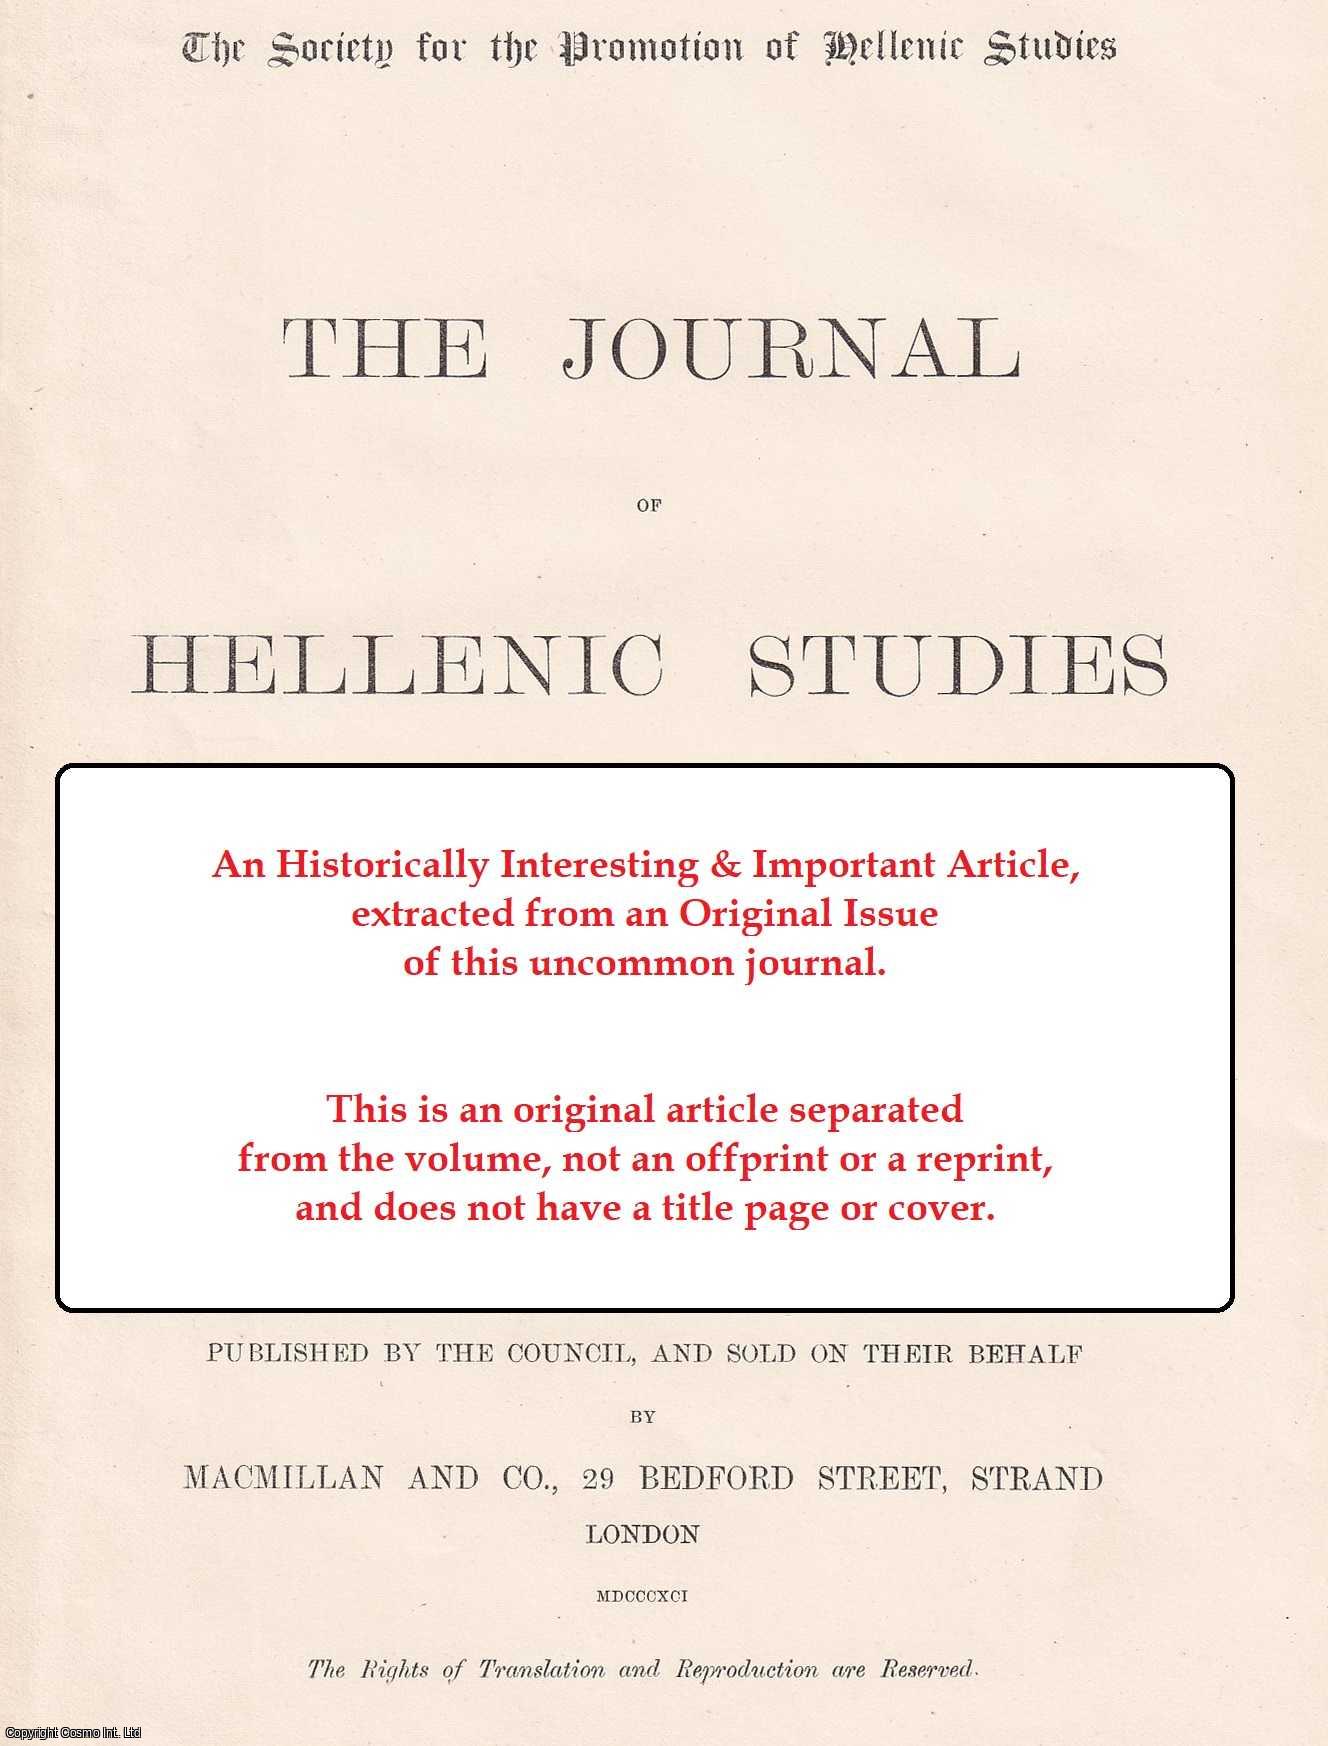 H. Stuart Jones - Two Vases by Phintias. An uncommon original article from the journal of Hellenic studies, 1891.